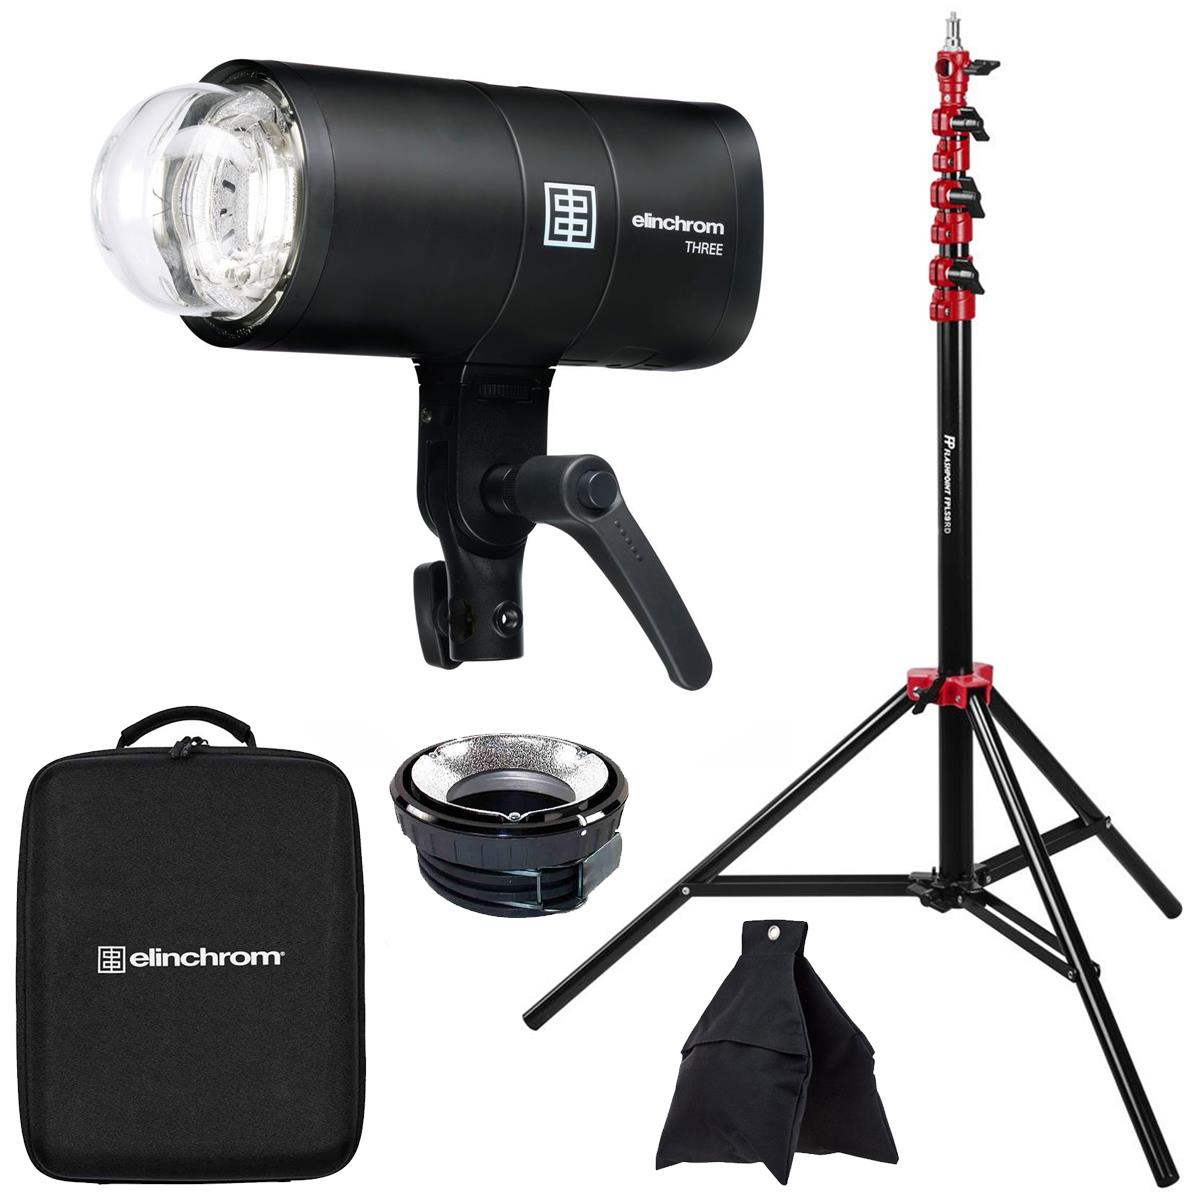 Image of Elinchrom THREE 261Ws Off-Camera Flash Kit with 9.5' Stand and Weight Sand Bag